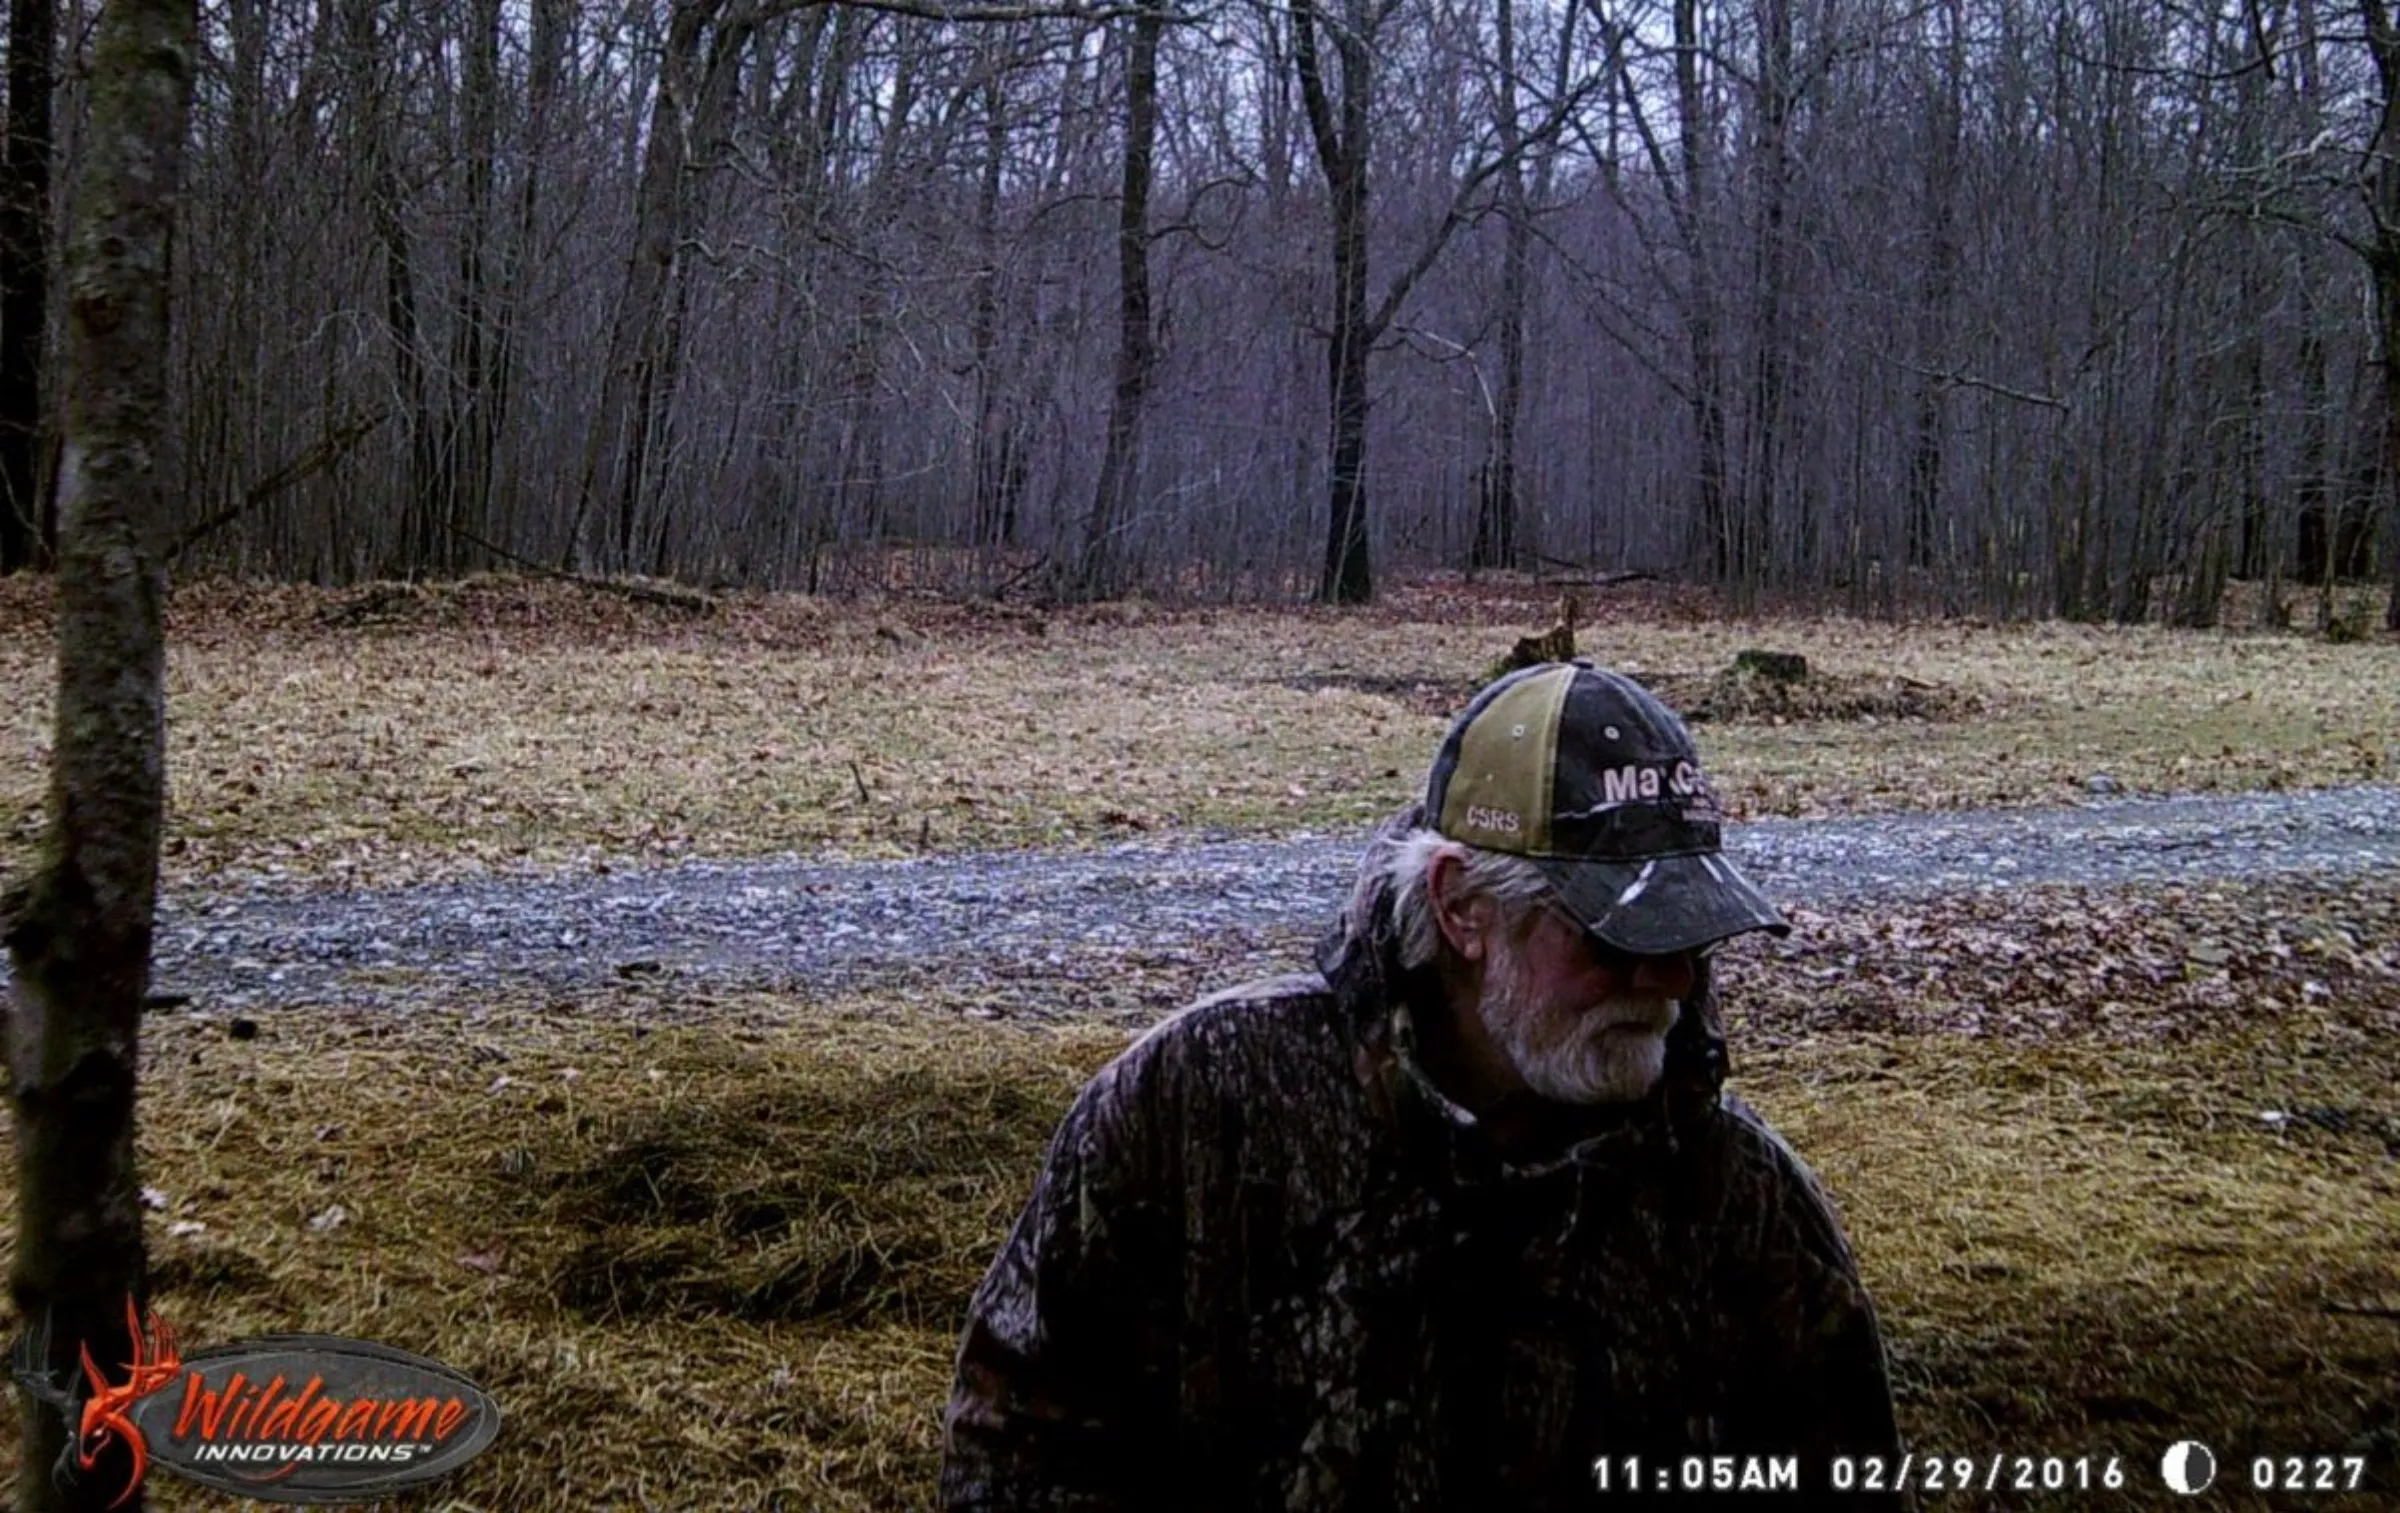 An image from a camera that allegedly surveilled clients at a hunting club in Pennsylvania, in this undated photo. Institute for Justice/Handout via Thomson Reuters Foundation